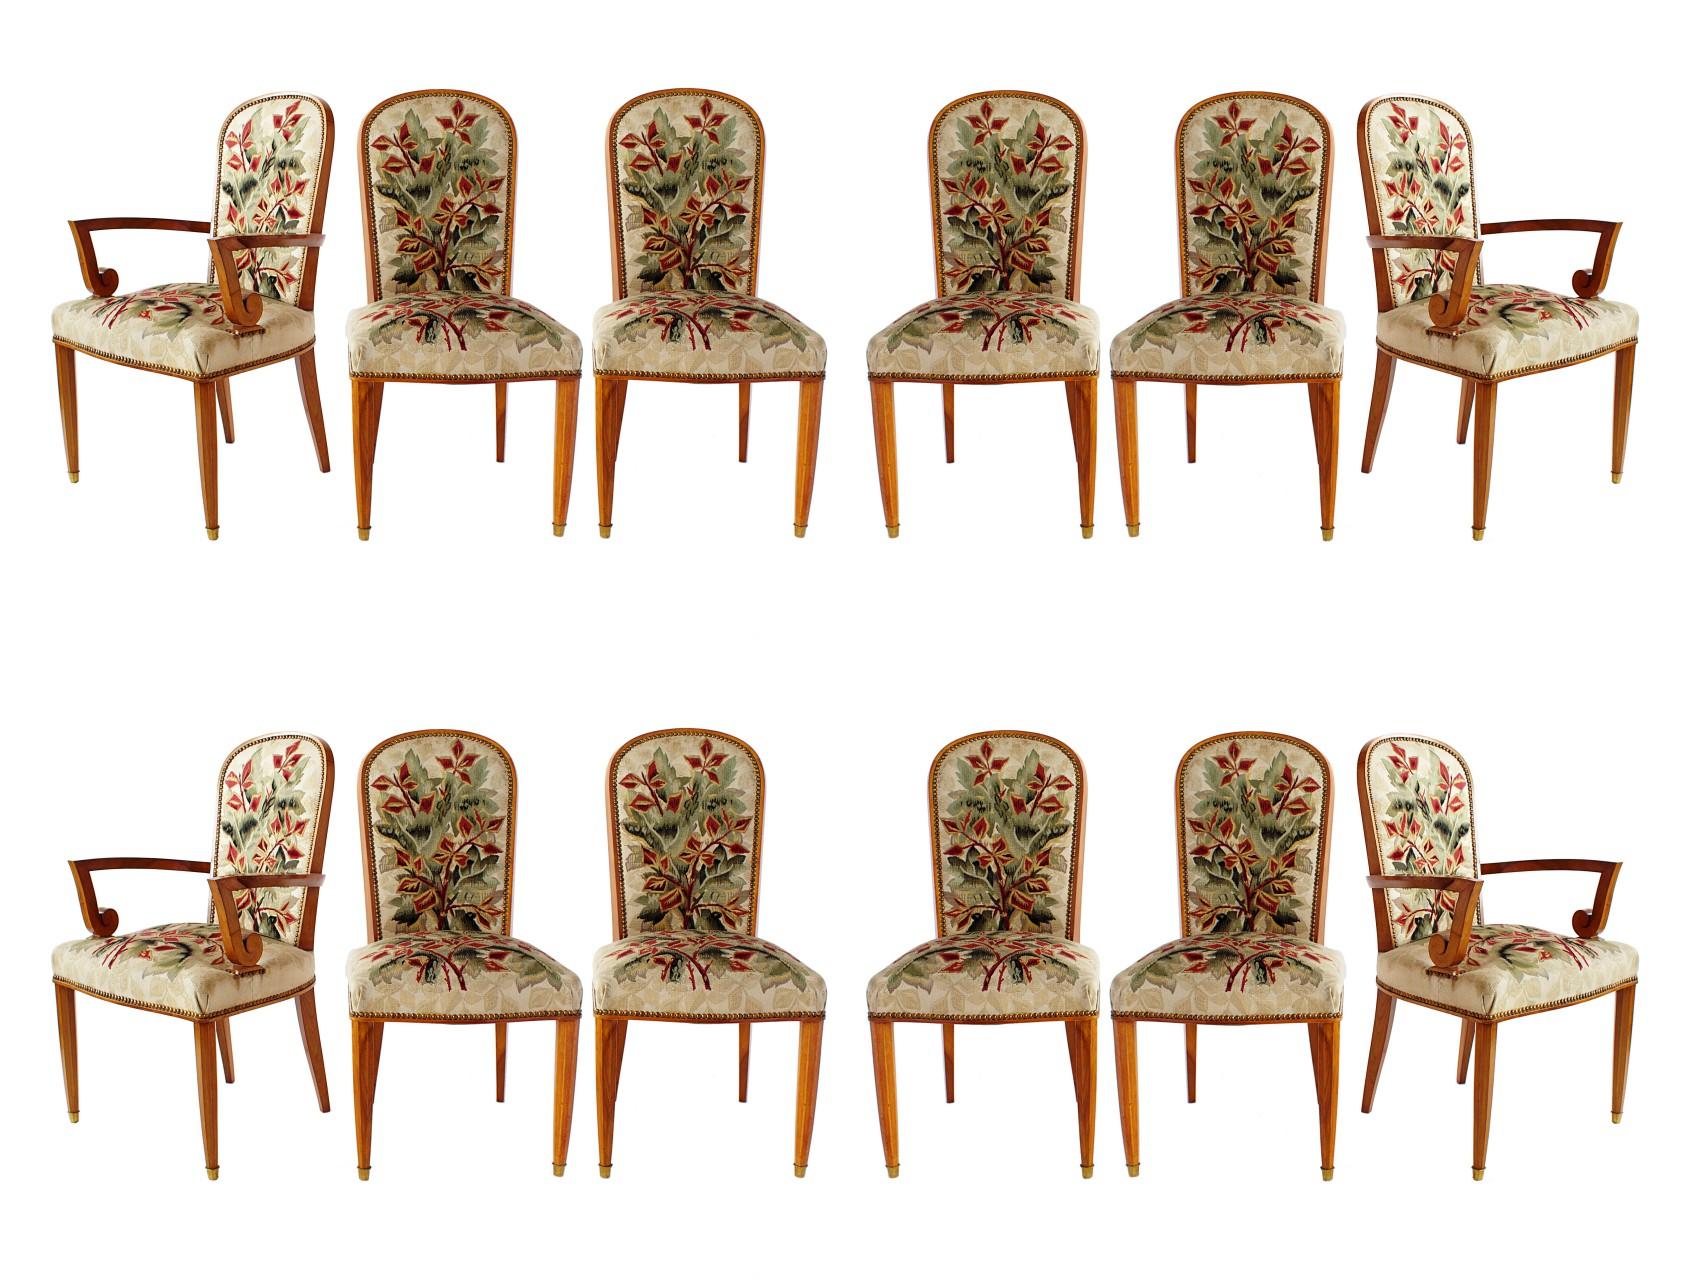 12 fruitwood dining chairs consisting of 4 arms and 6 sides, with original Aubusson tapestry upholstery, by Paule Leleu. Provenance: Dining Room of Mr and Mes Dervveaux, 1956, as illustrated on page 224, The house of Leleu, Francoise Siriex.